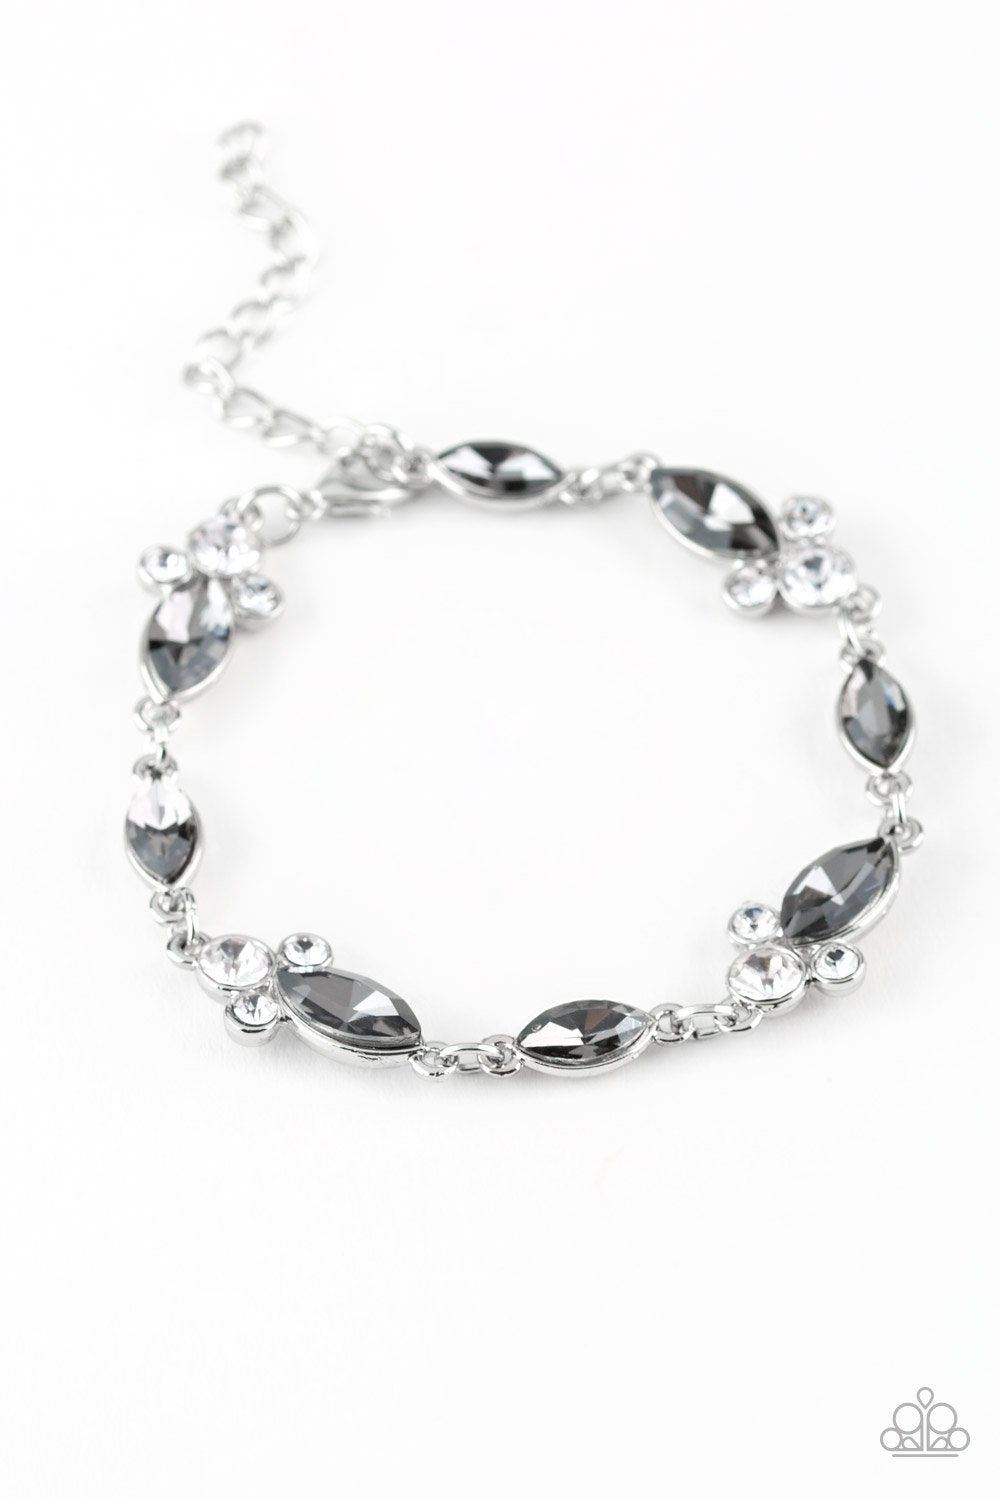 "At Any Cost" - Silver #909 - Paparazzi Accessories